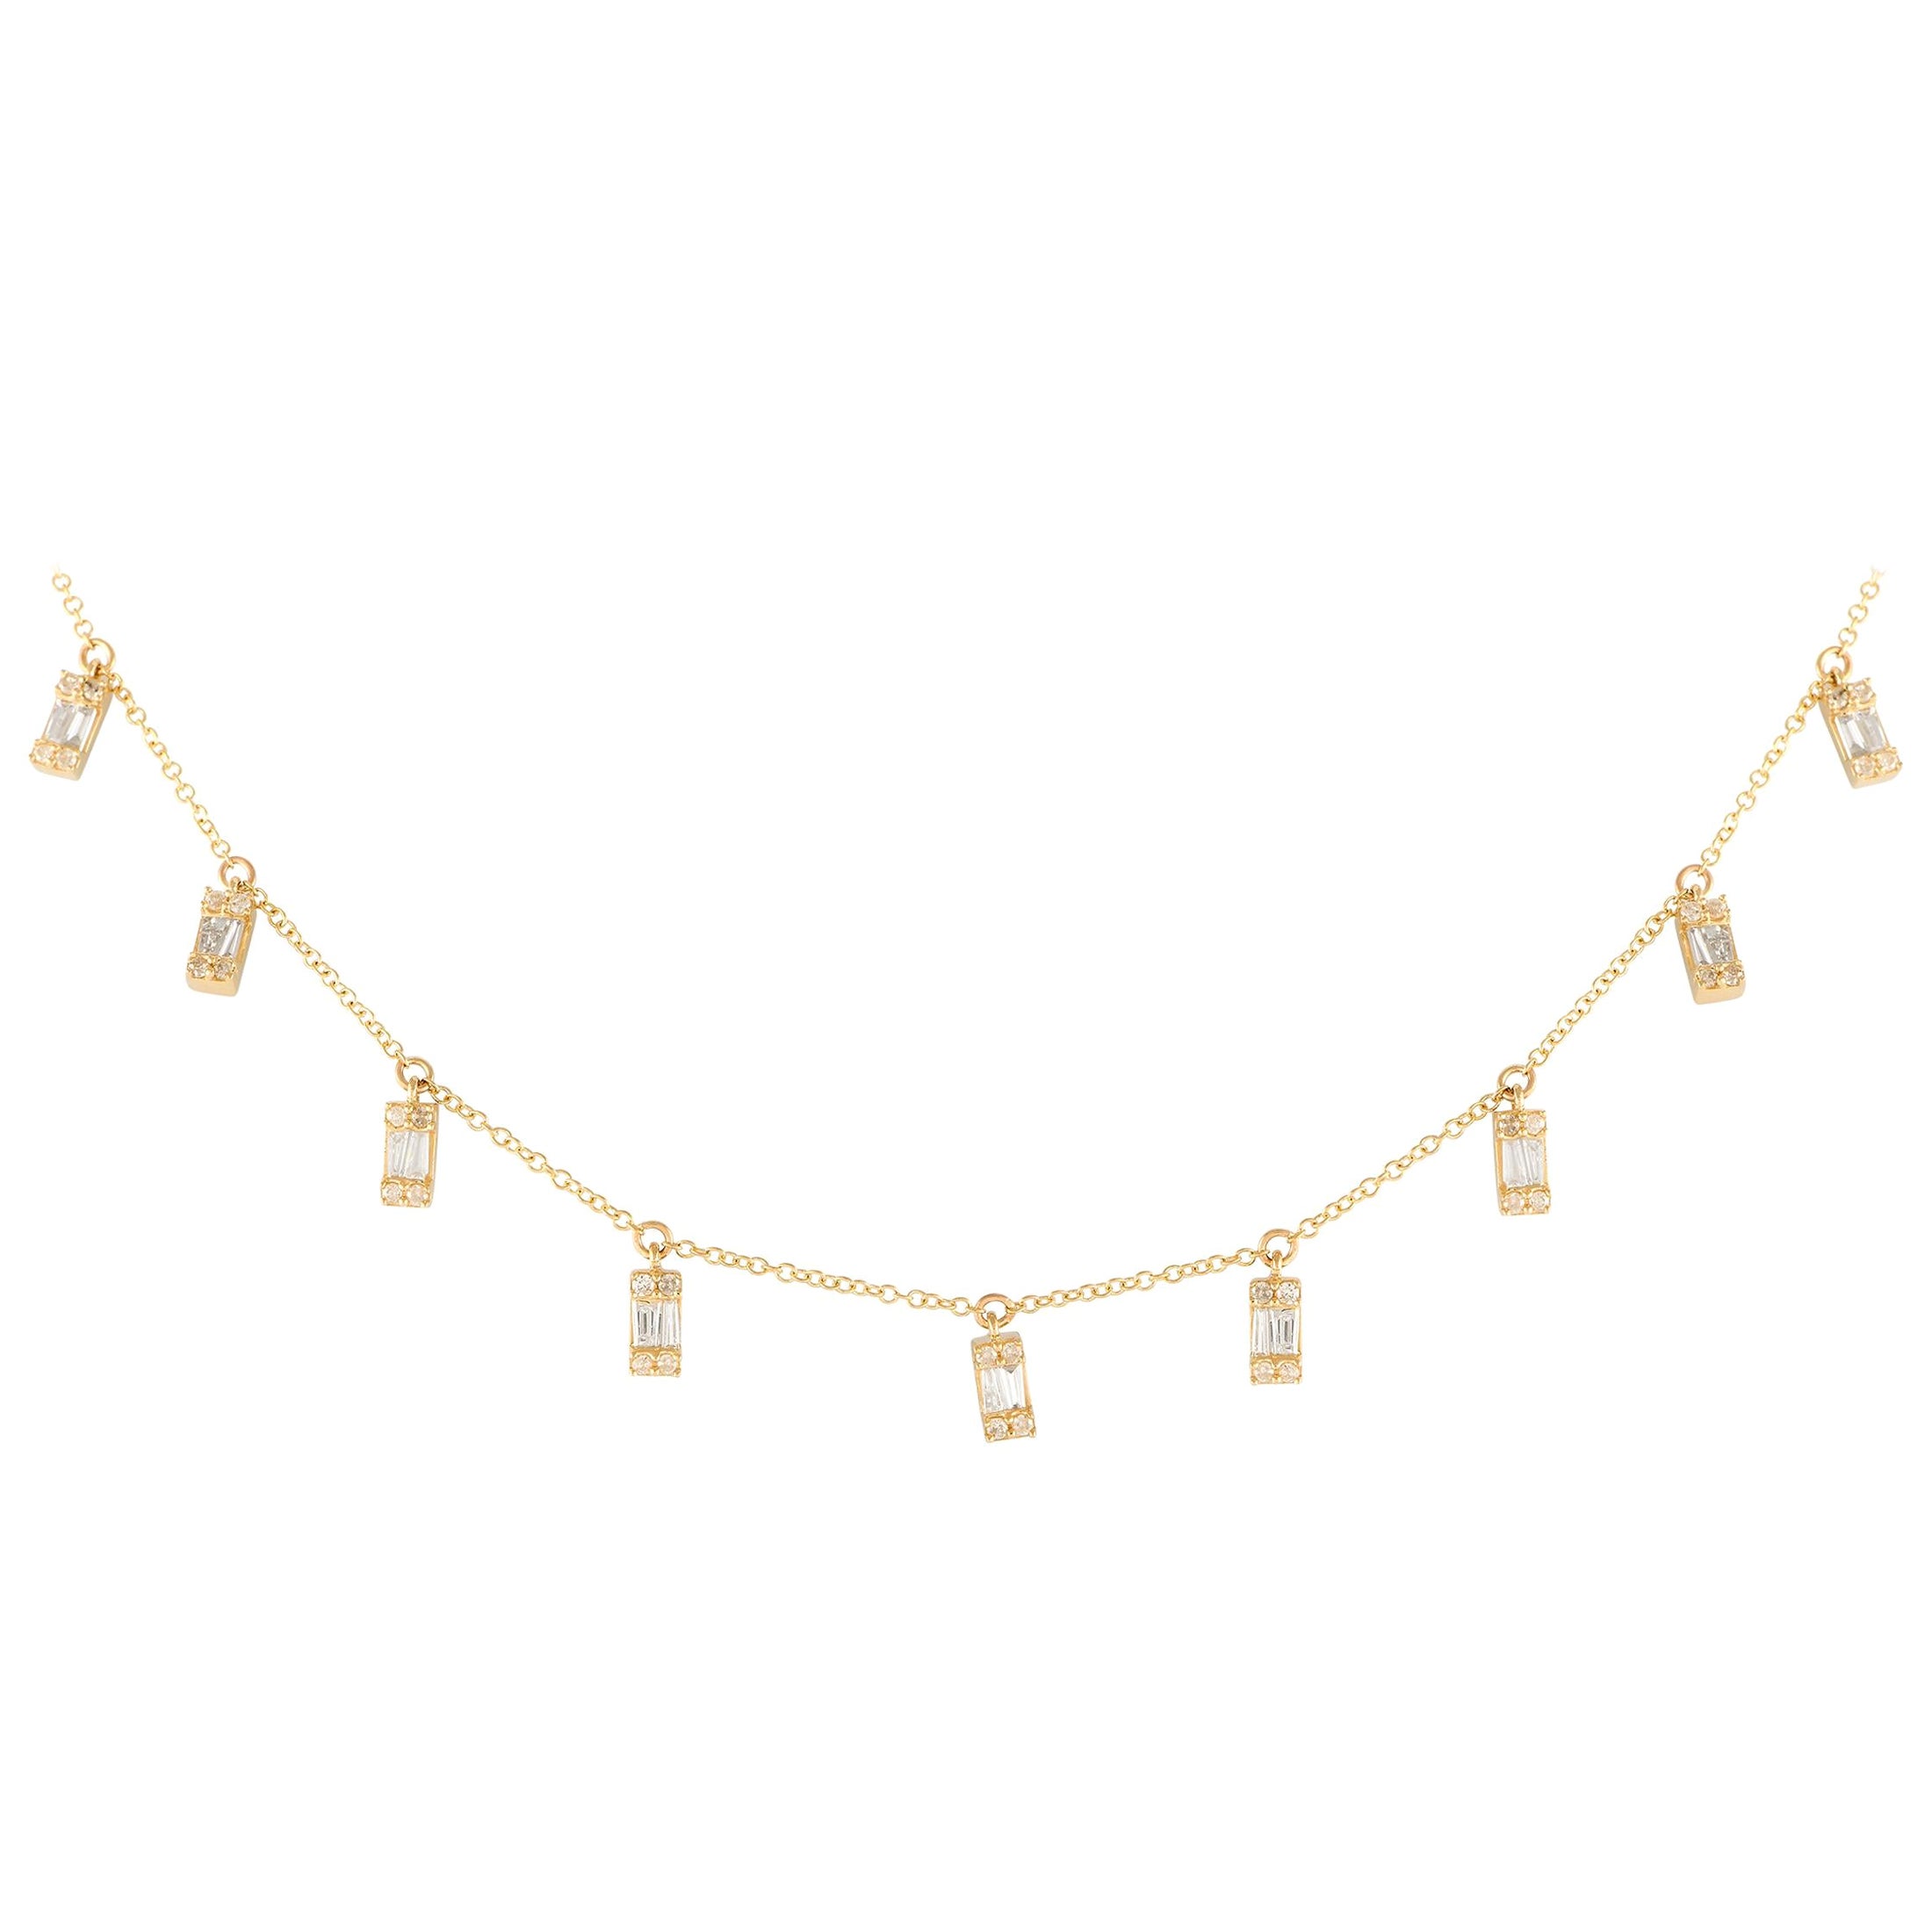 LB Exclusive 14K Yellow Gold 0.98ct Diamond Station Necklace NK01433 For Sale